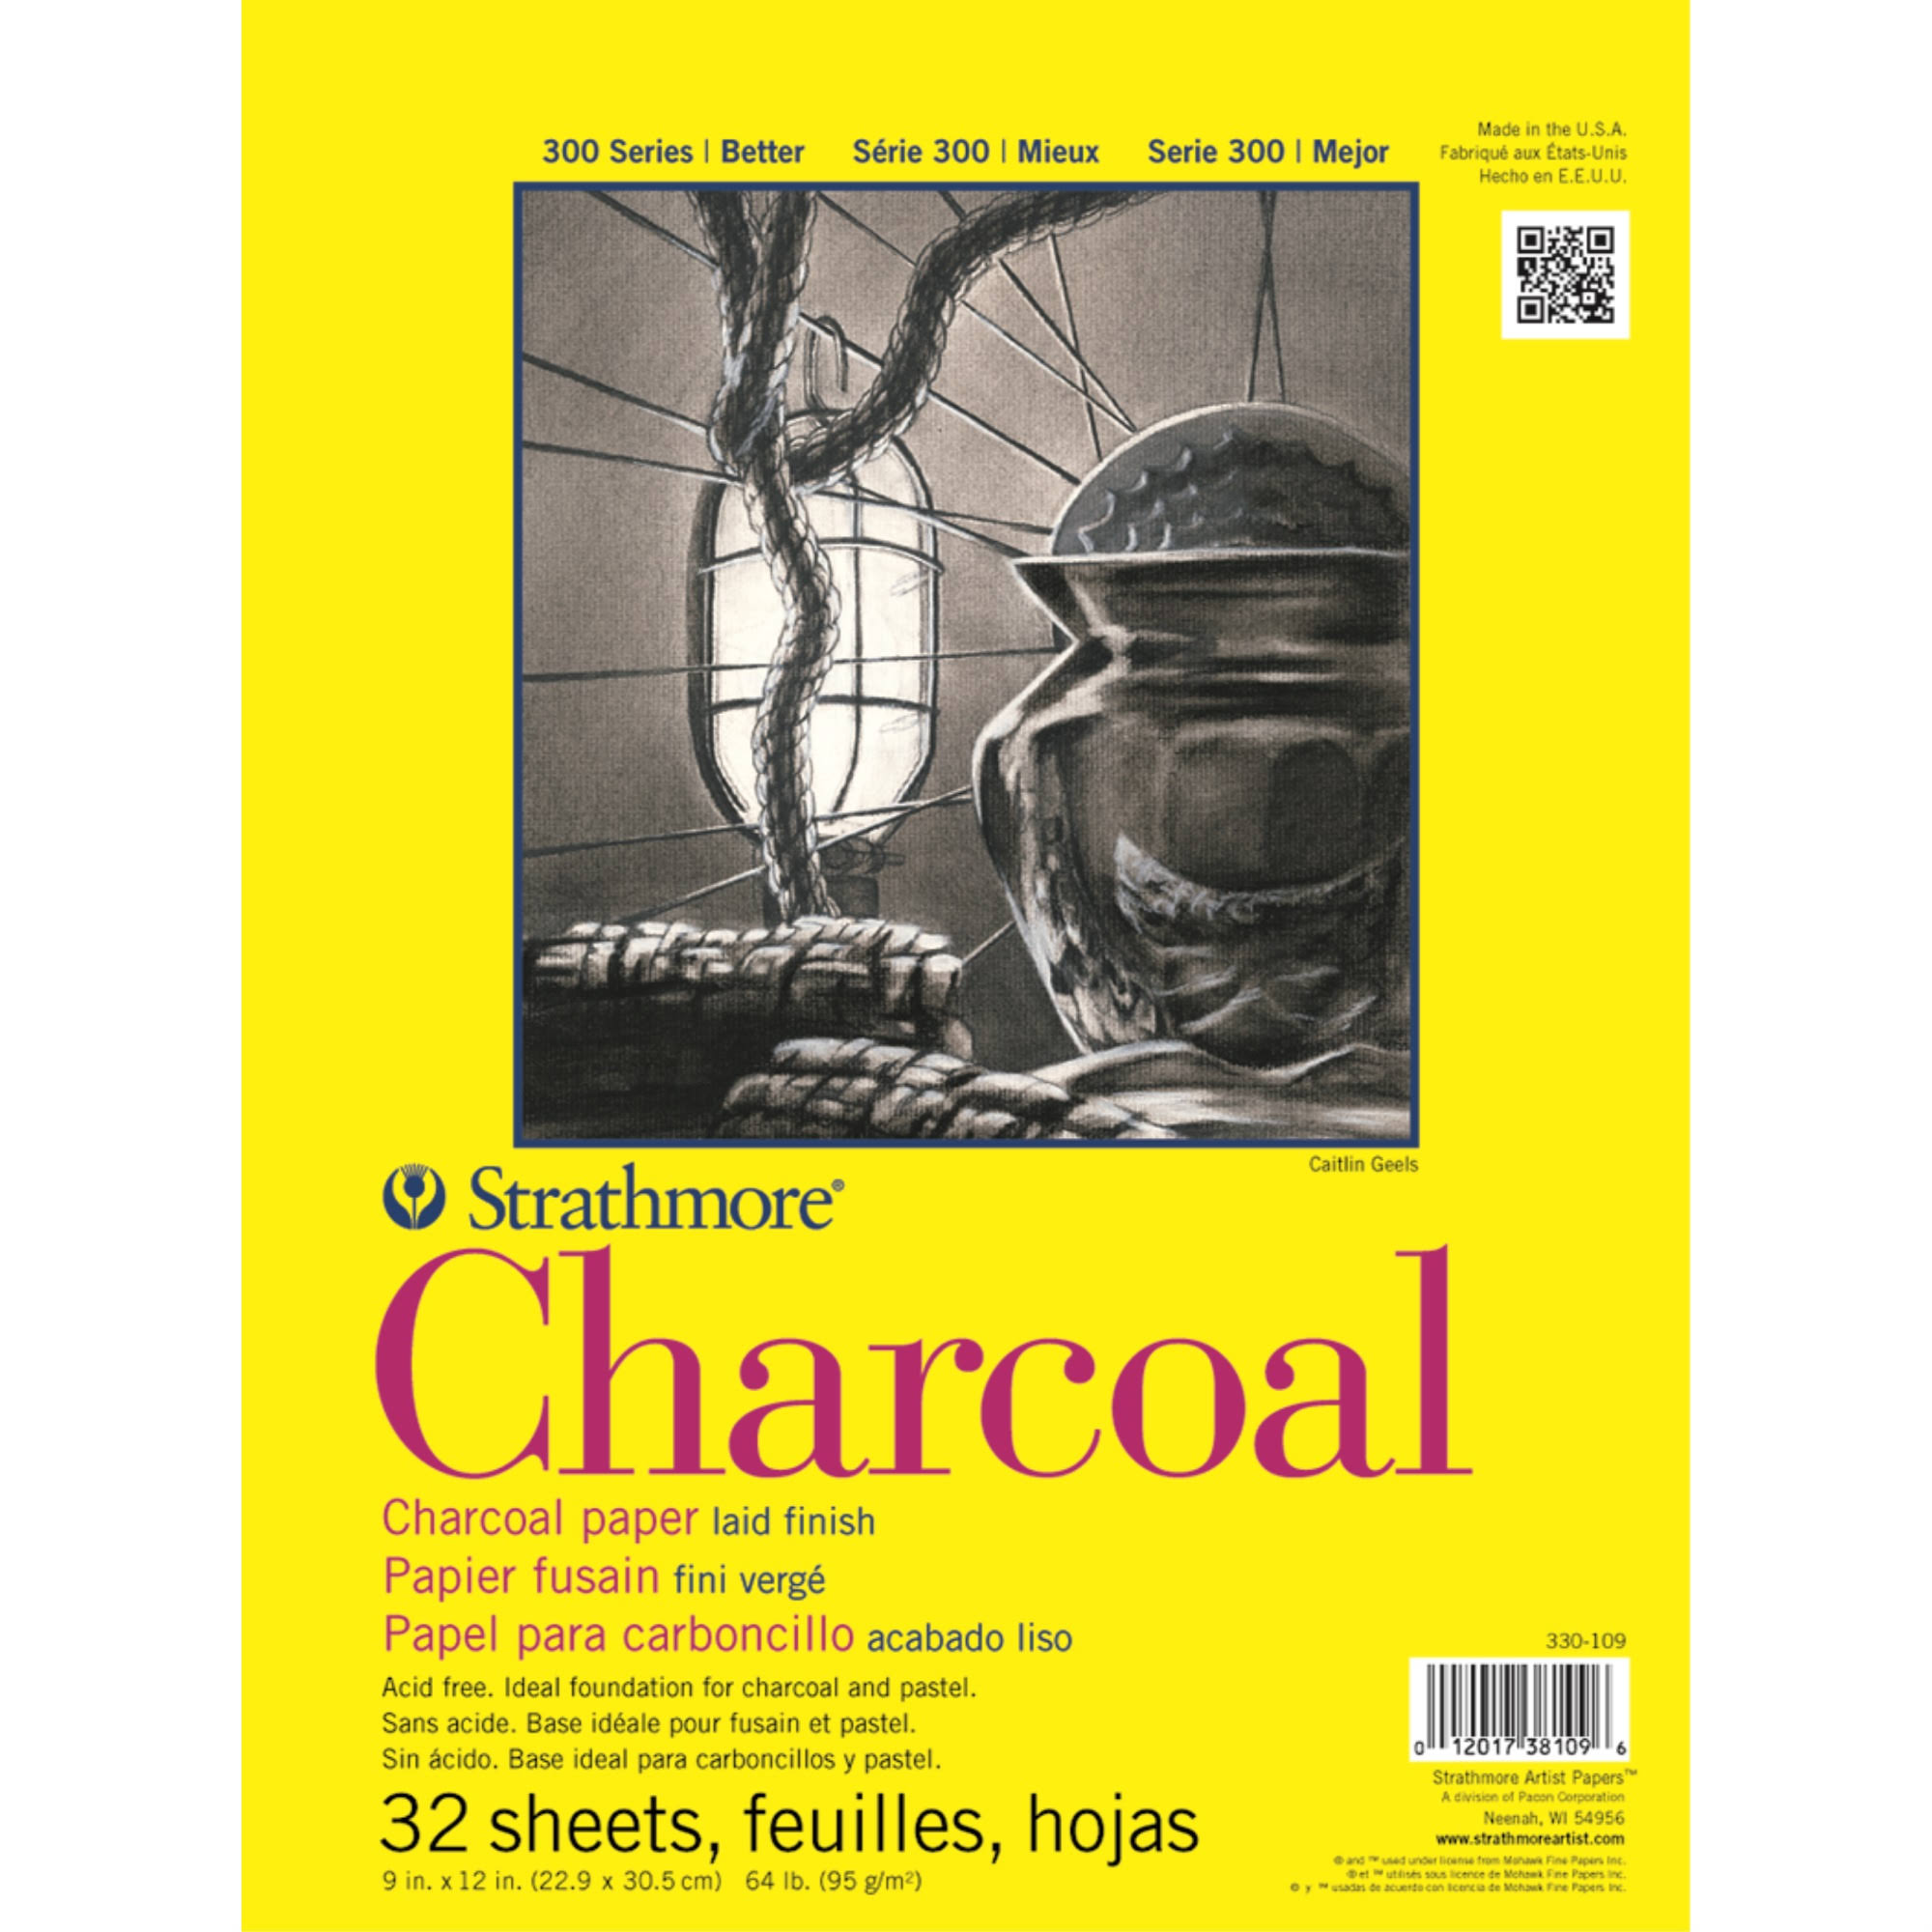 Strathmore Charcoal Drawing Paper - 9" x 12", 32 Sheets, 64lb